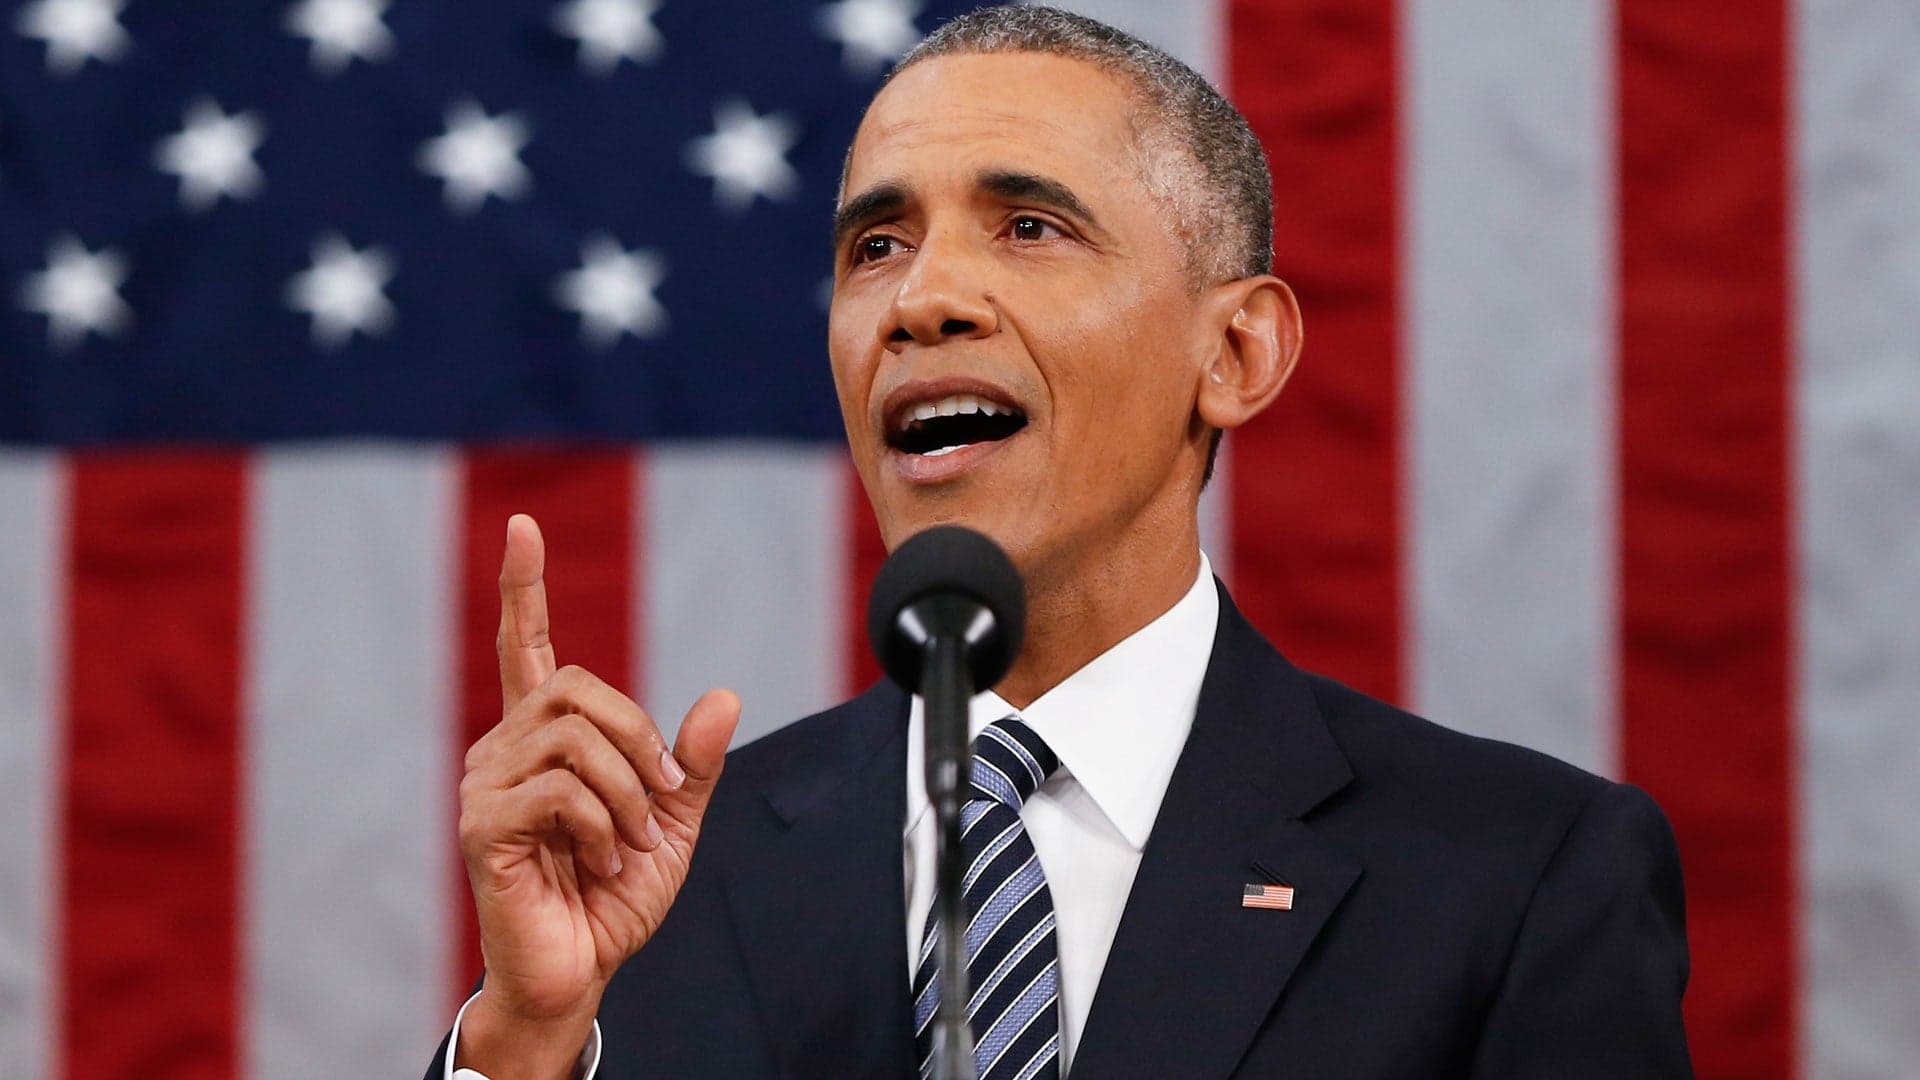 Obama’s State of the Union Proves He’s a Car Guy